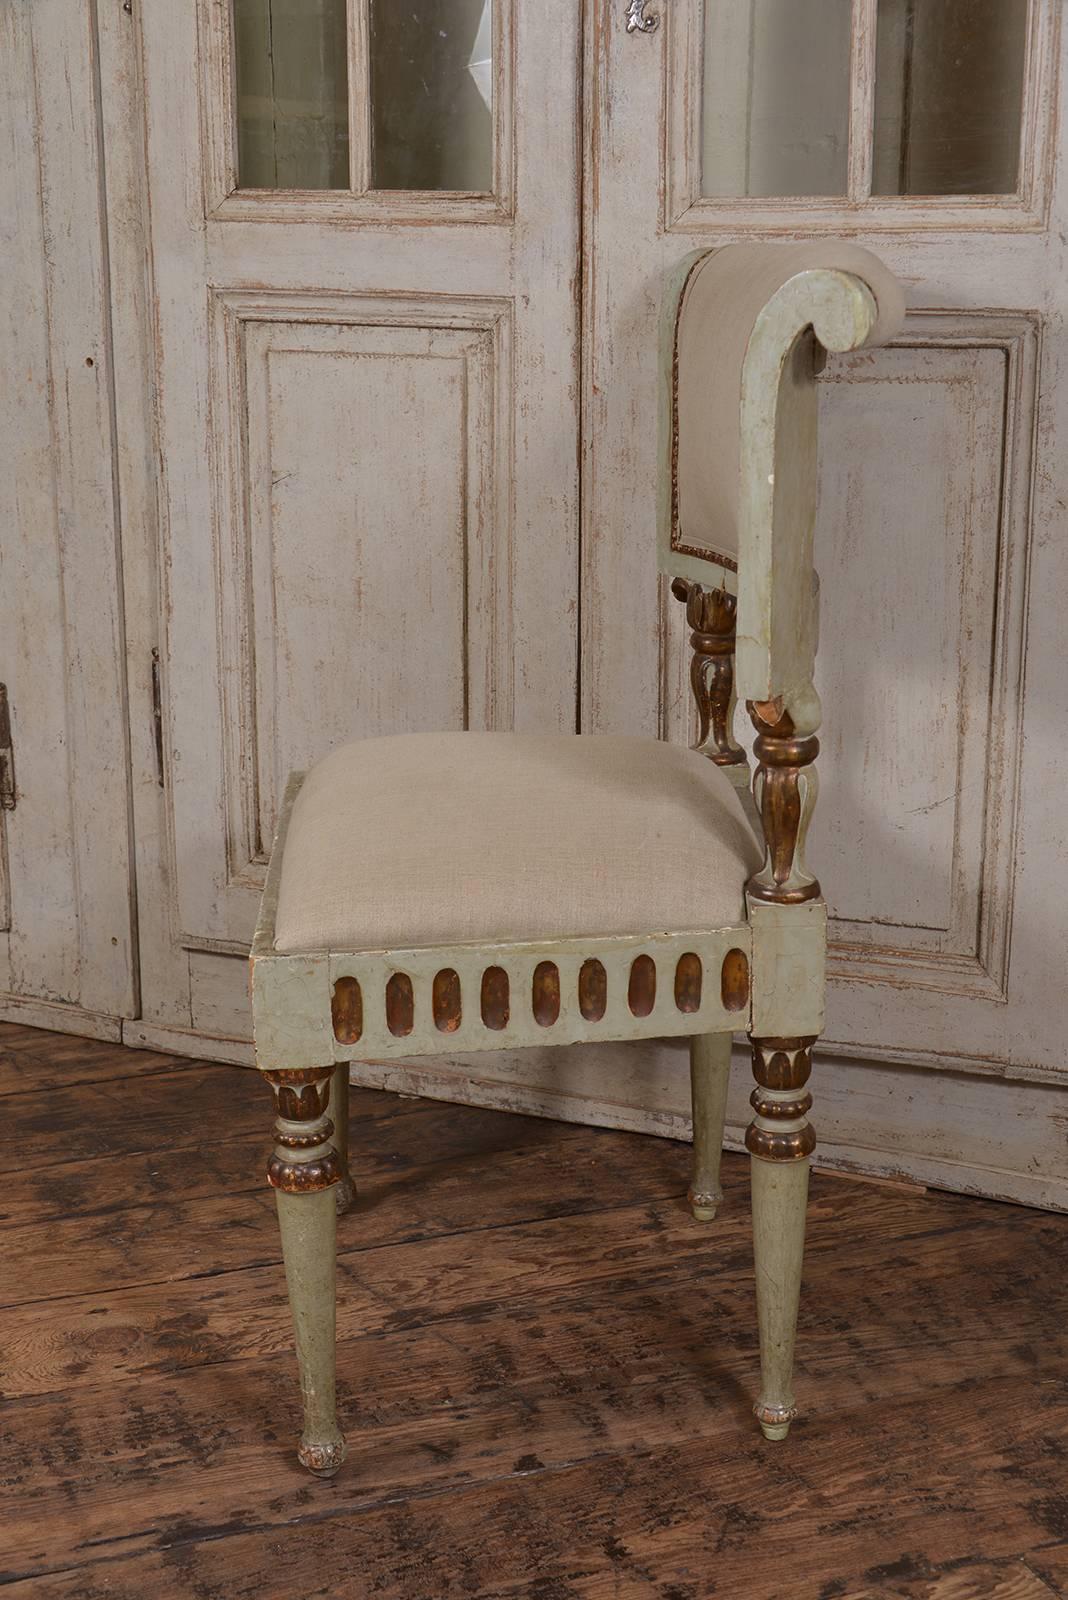 Set of four beautiful 18th century Italian painted chairs.